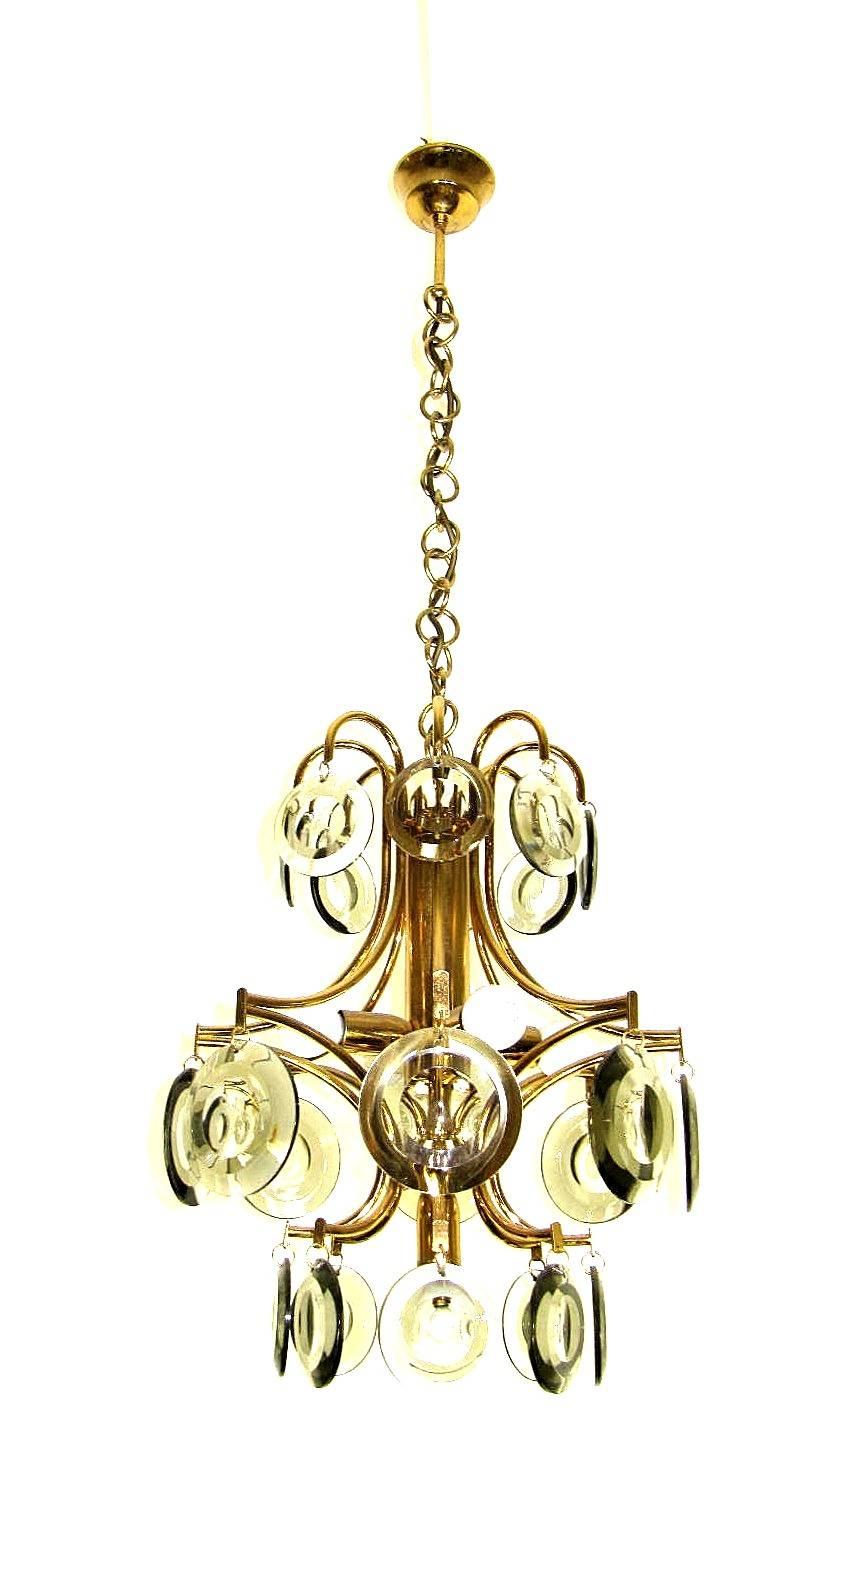 Five bulbs, ceiling lamp in Italian design. Brass and 24 polished slices of smoked glass. Very good condition.
Measures: Height 100 cm.